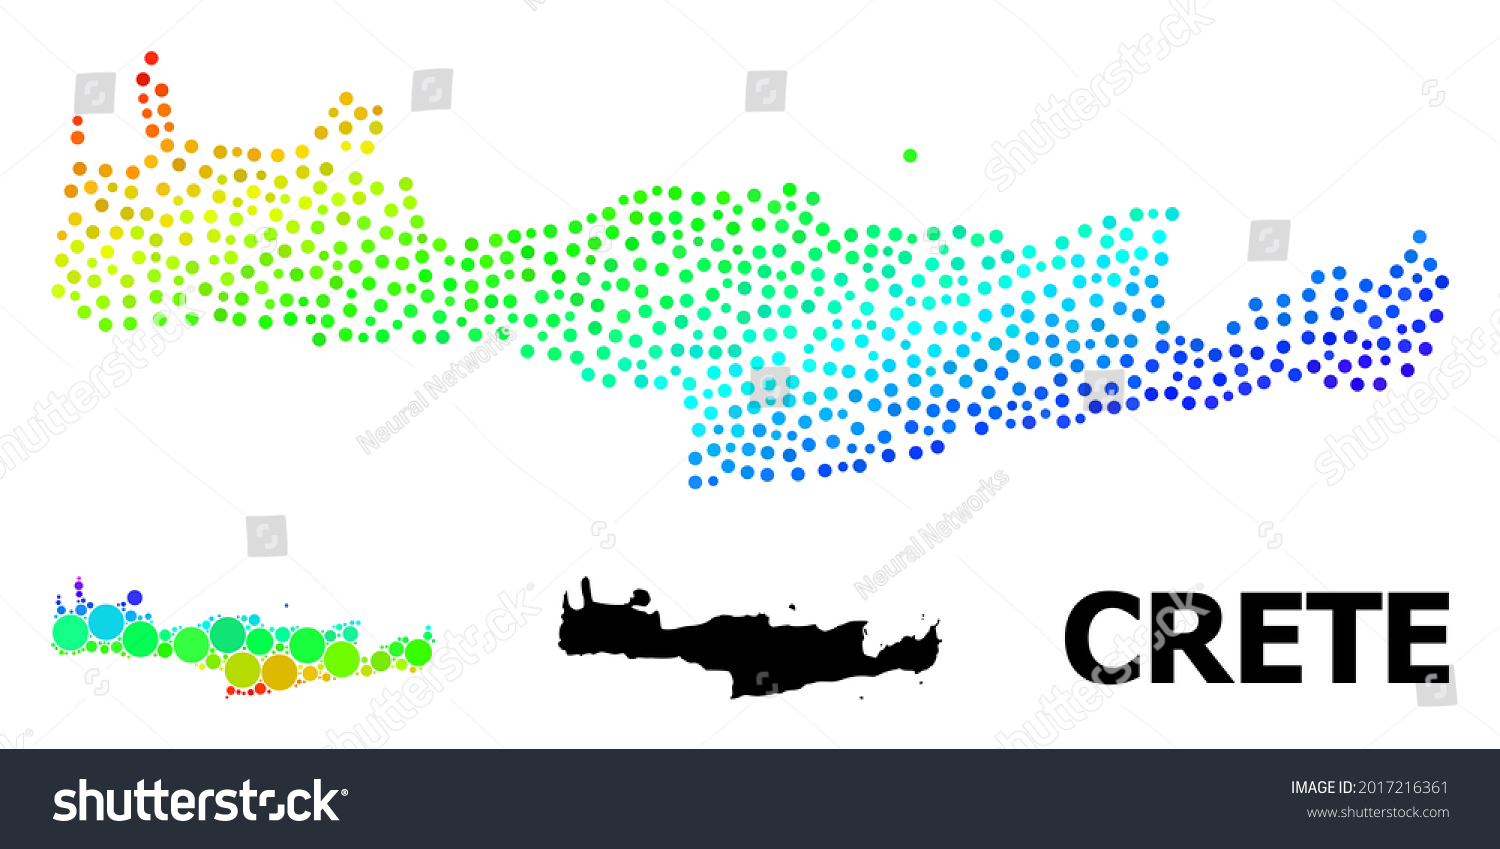 SVG of Pixelated spectral, and monochrome map of Crete Island, and black title. Vector structure is created from map of Crete Island with circles. Illustration designed for political purposes. svg